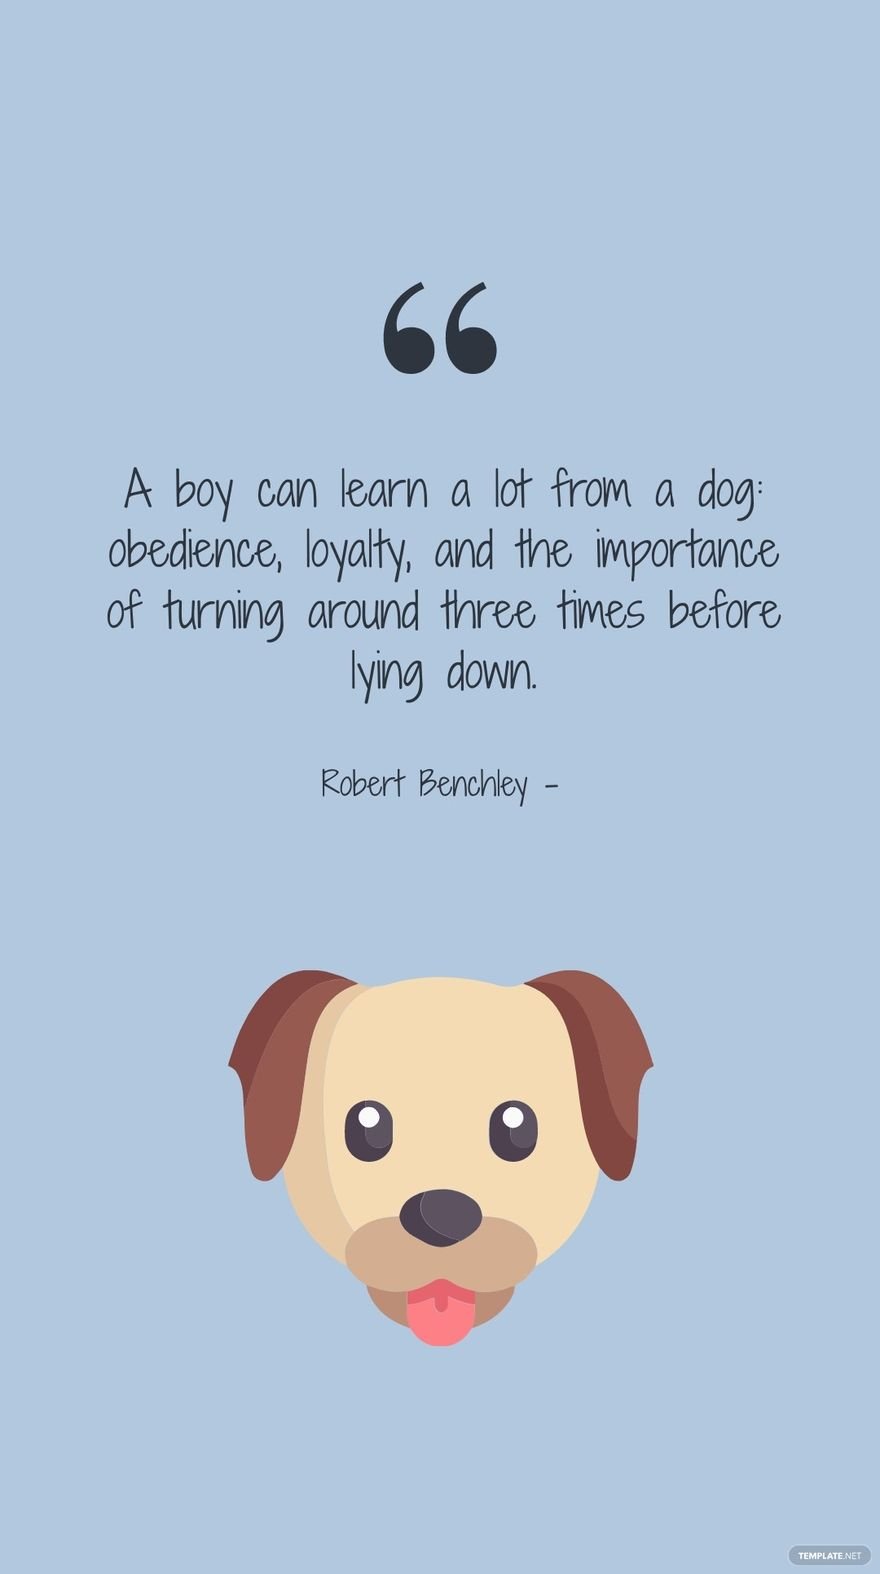 Free Robert Benchley - A boy can learn a lot from a dog: obedience, loyalty, and the importance of turning around three times before lying down. in JPG